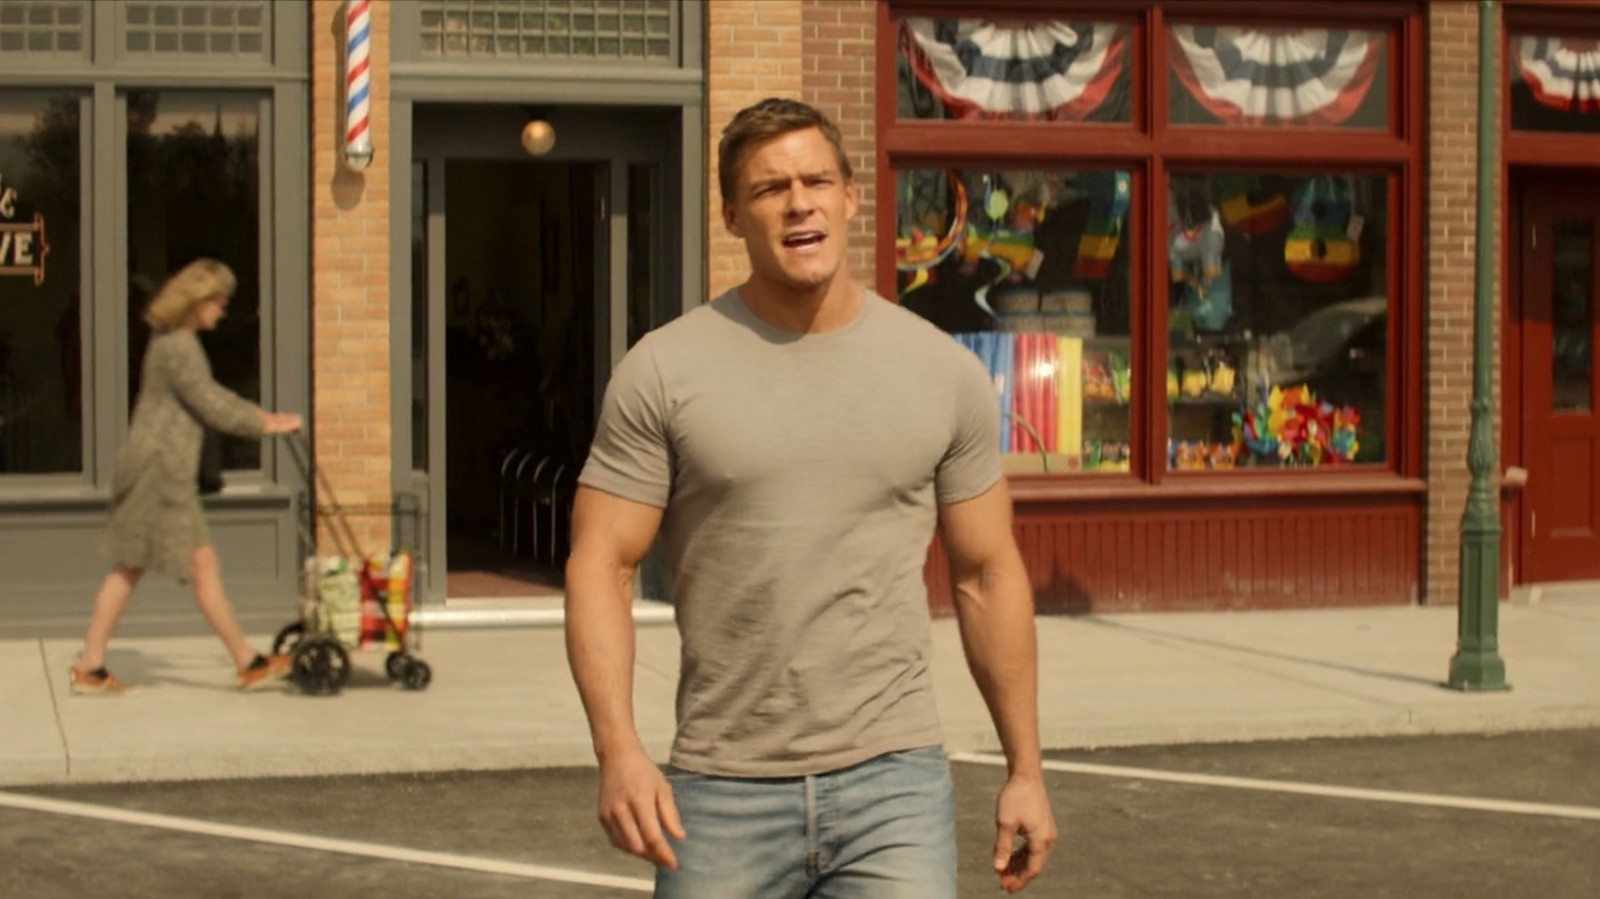 I was mortified”: Reacher Star Alan Ritchson Was Massively Insecure About  His 1 Feature Despite Being the Perfect Genetic Specimen